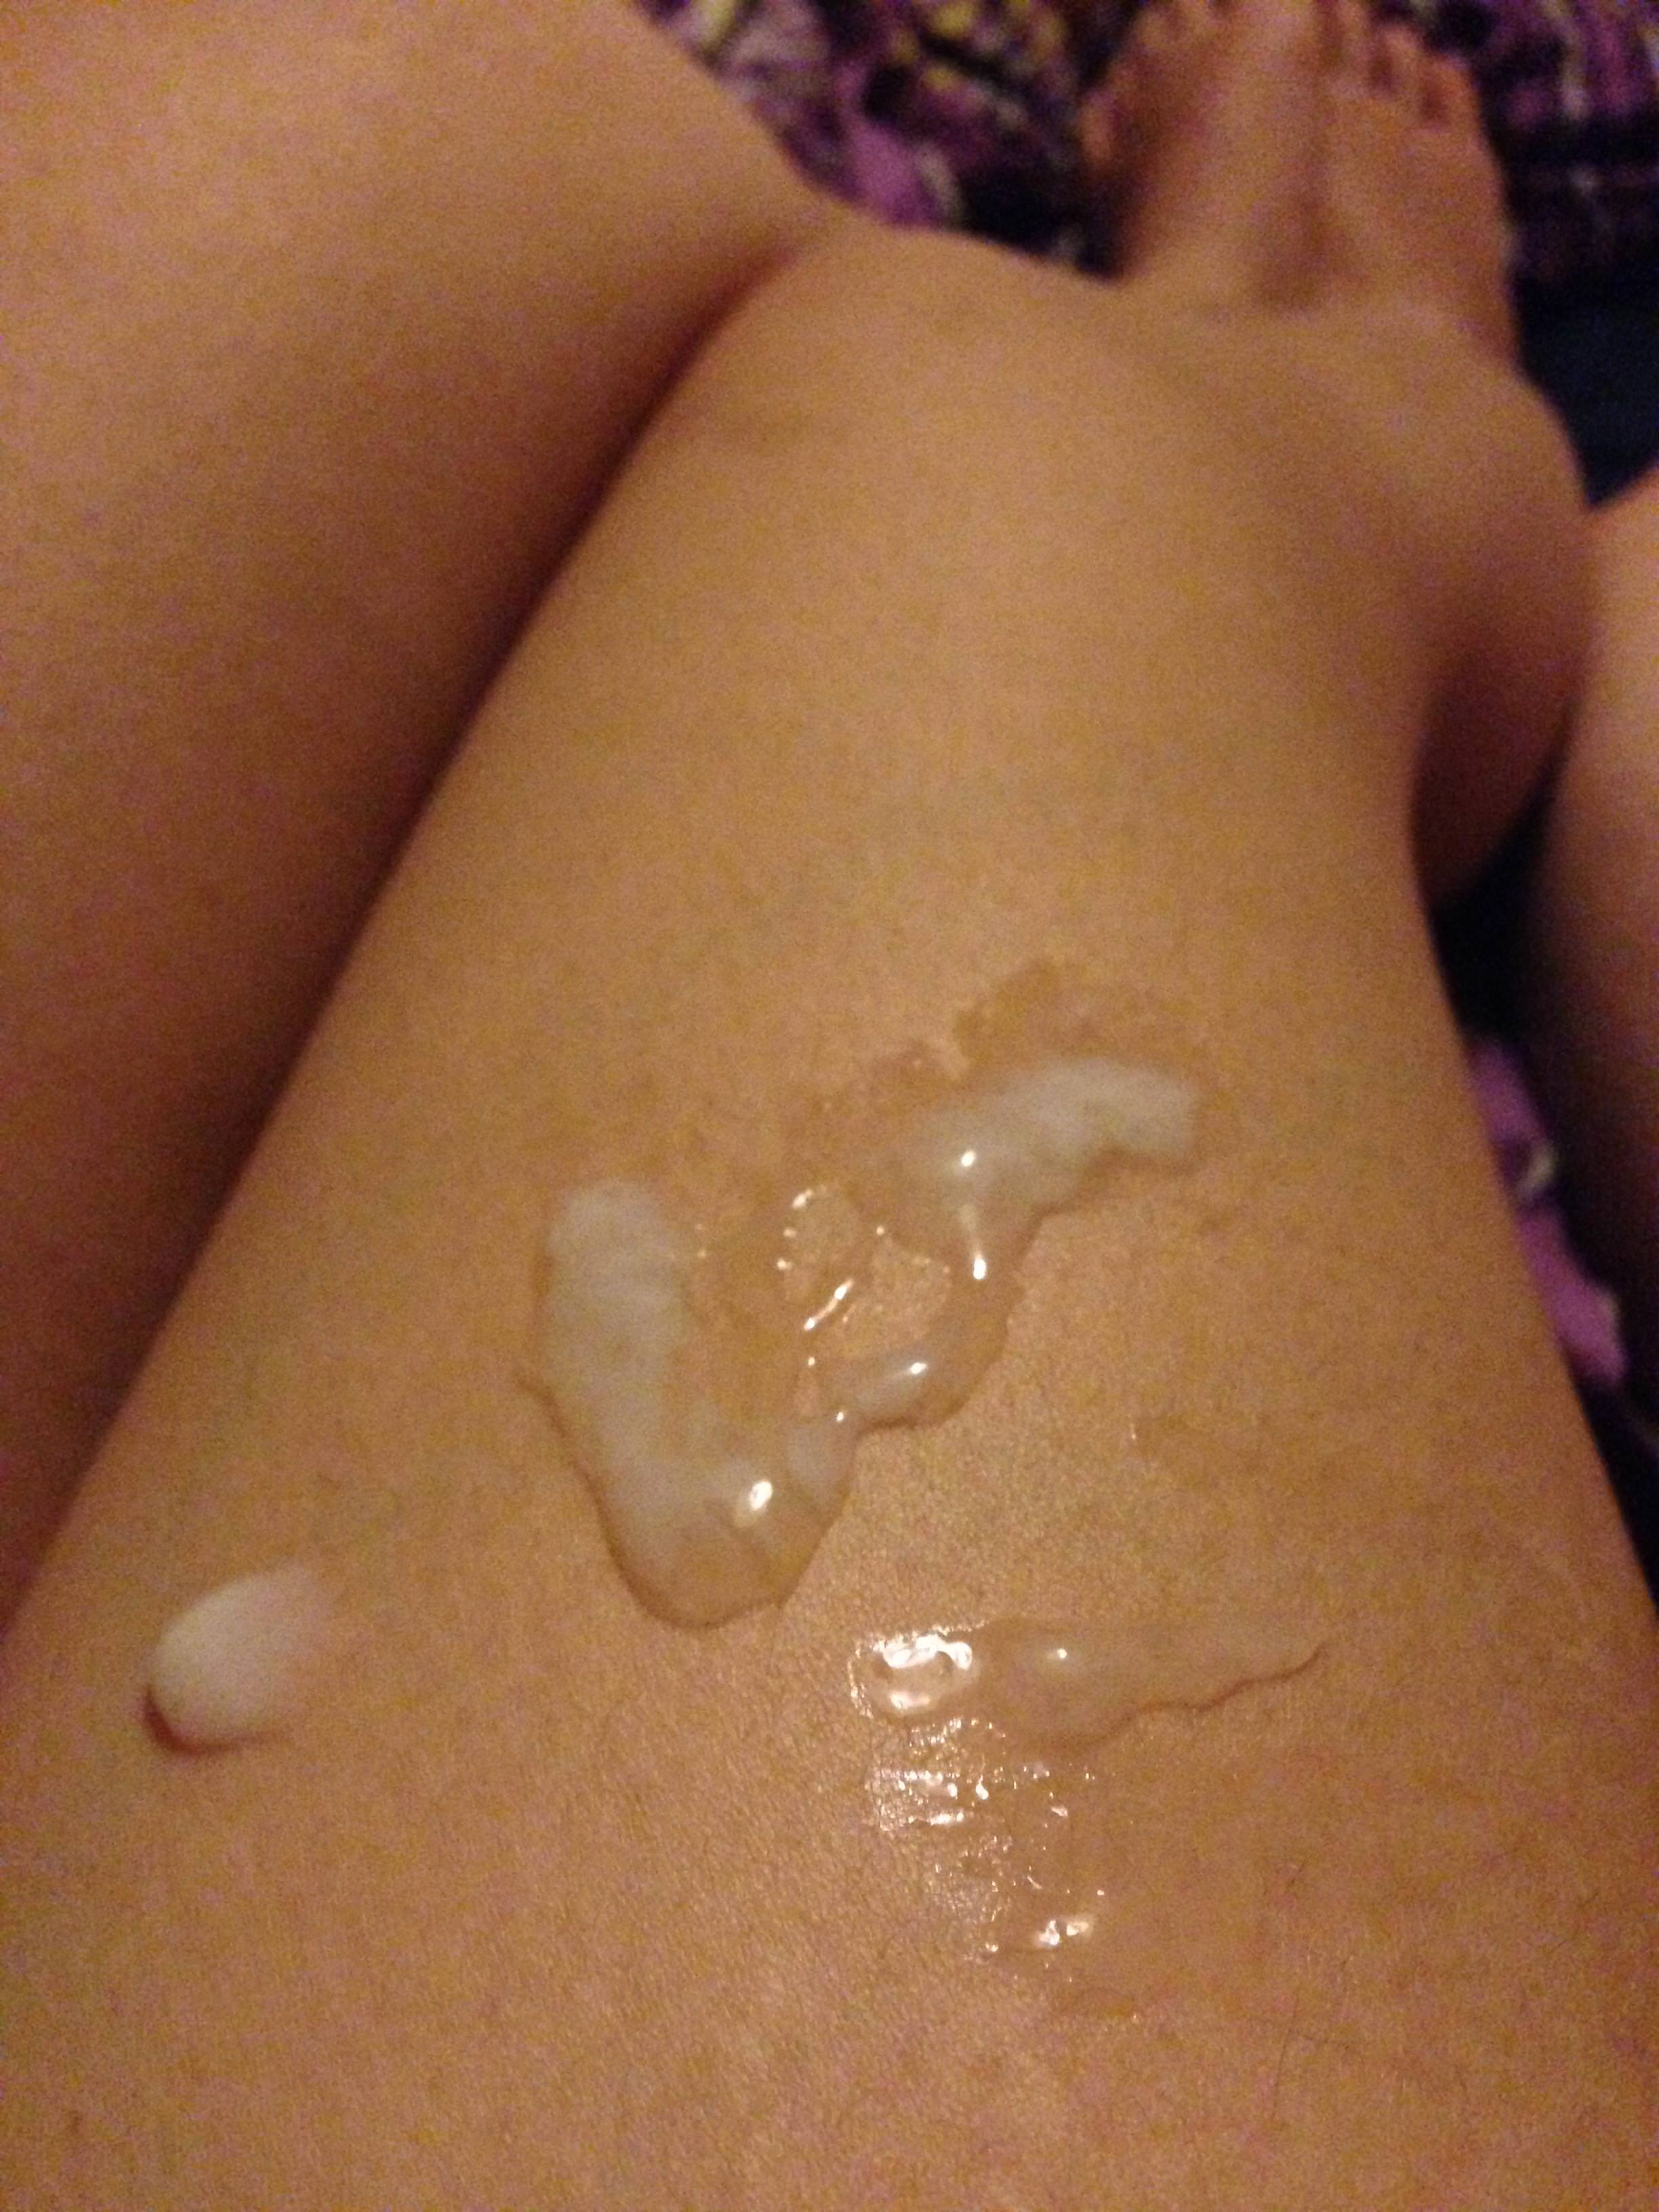 Love A Little Cum On My Leg Would You Double It Porn Pic Eporner